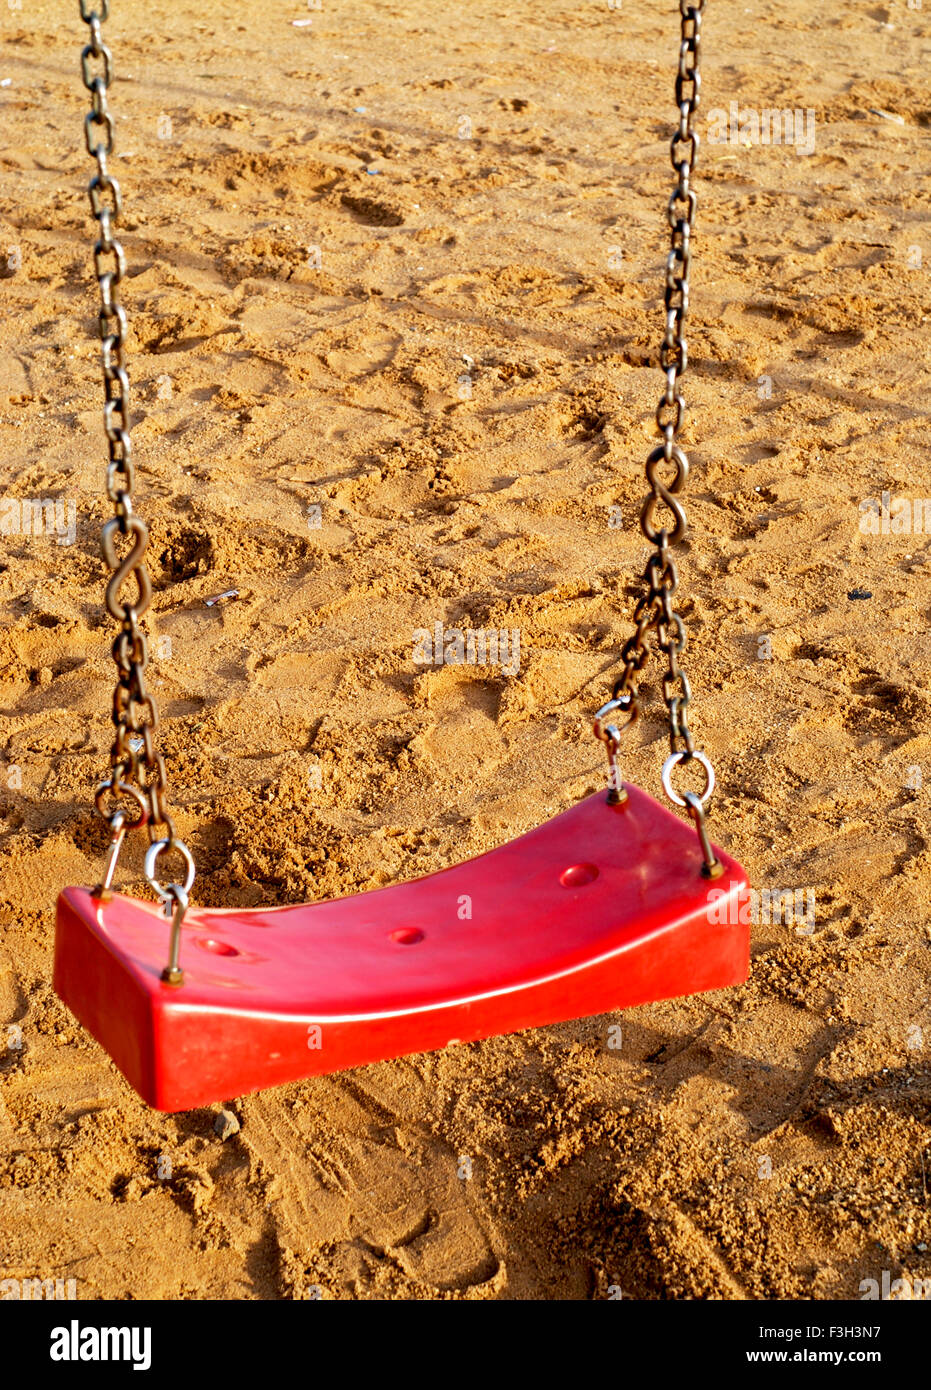 Plastic red seat of swing for children at race course ground ; Rajkot ; Gujarat ; India Stock Photo